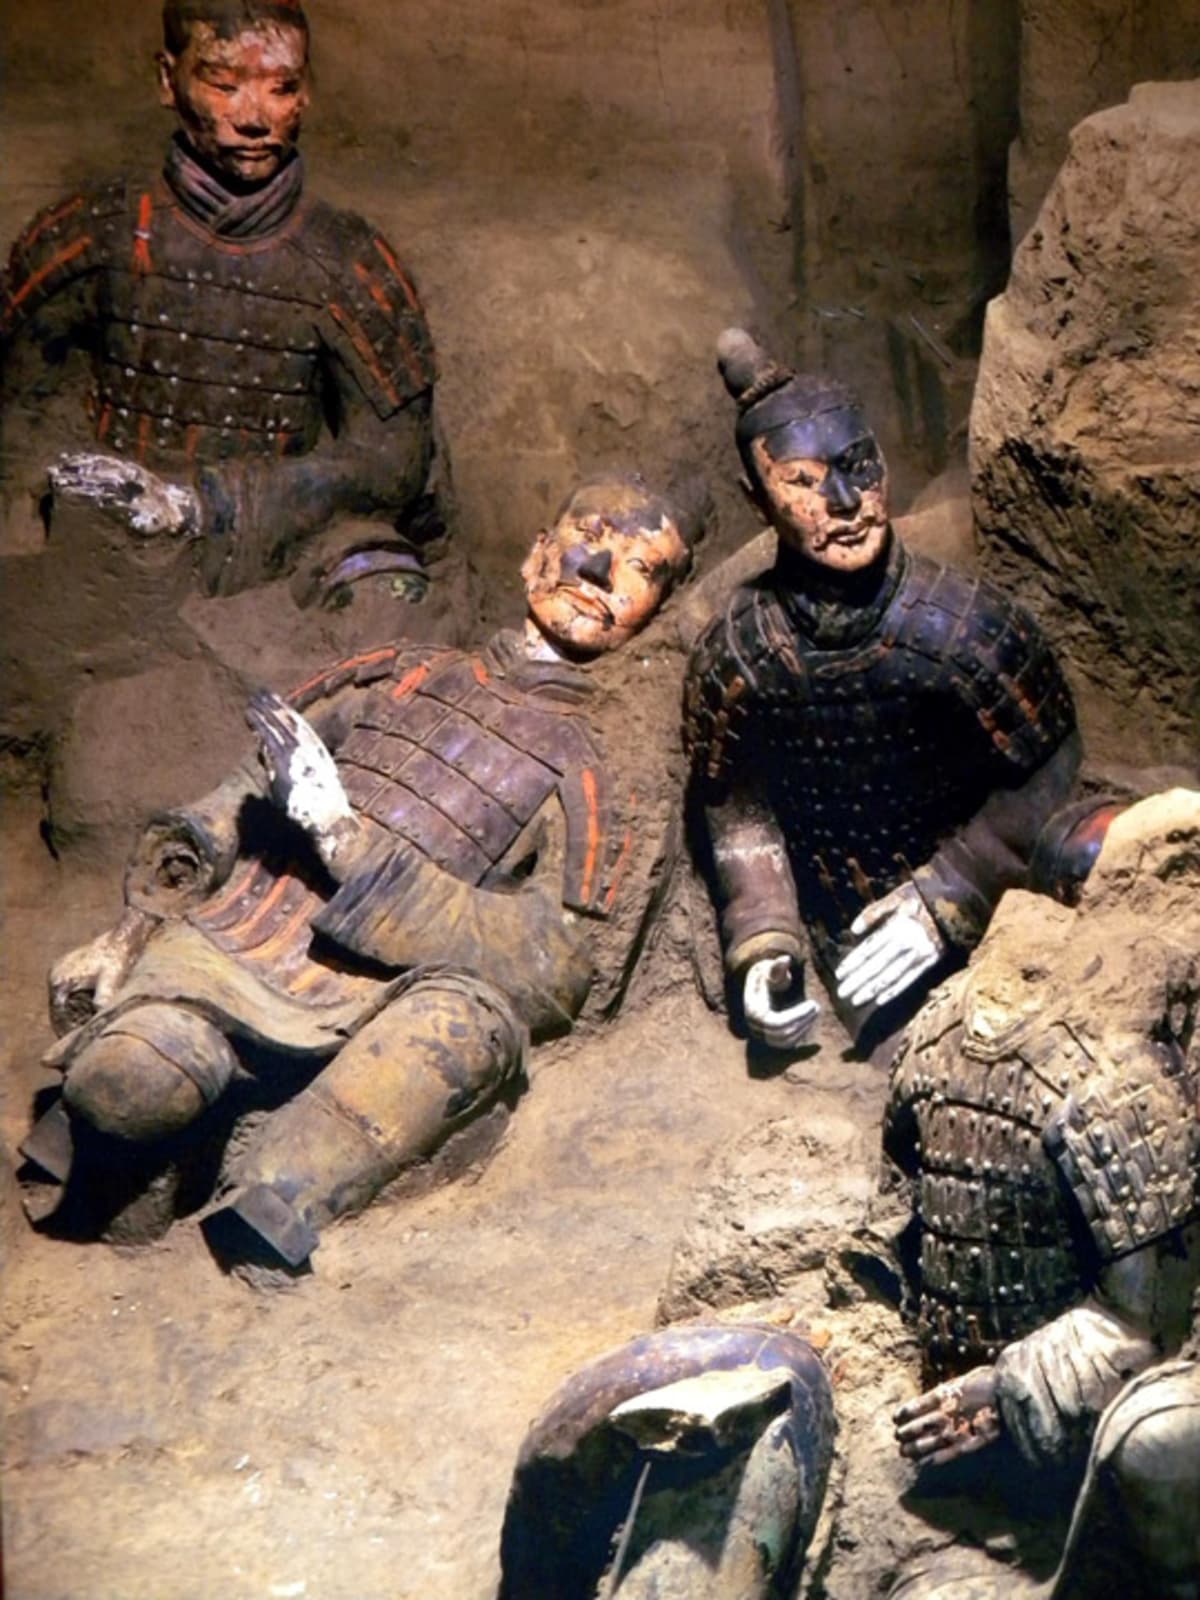 Photo taken in 1974 showing the freshly excavated 2230 yr old Terracotta warriors still showing original color before rapid deterioration.jpg